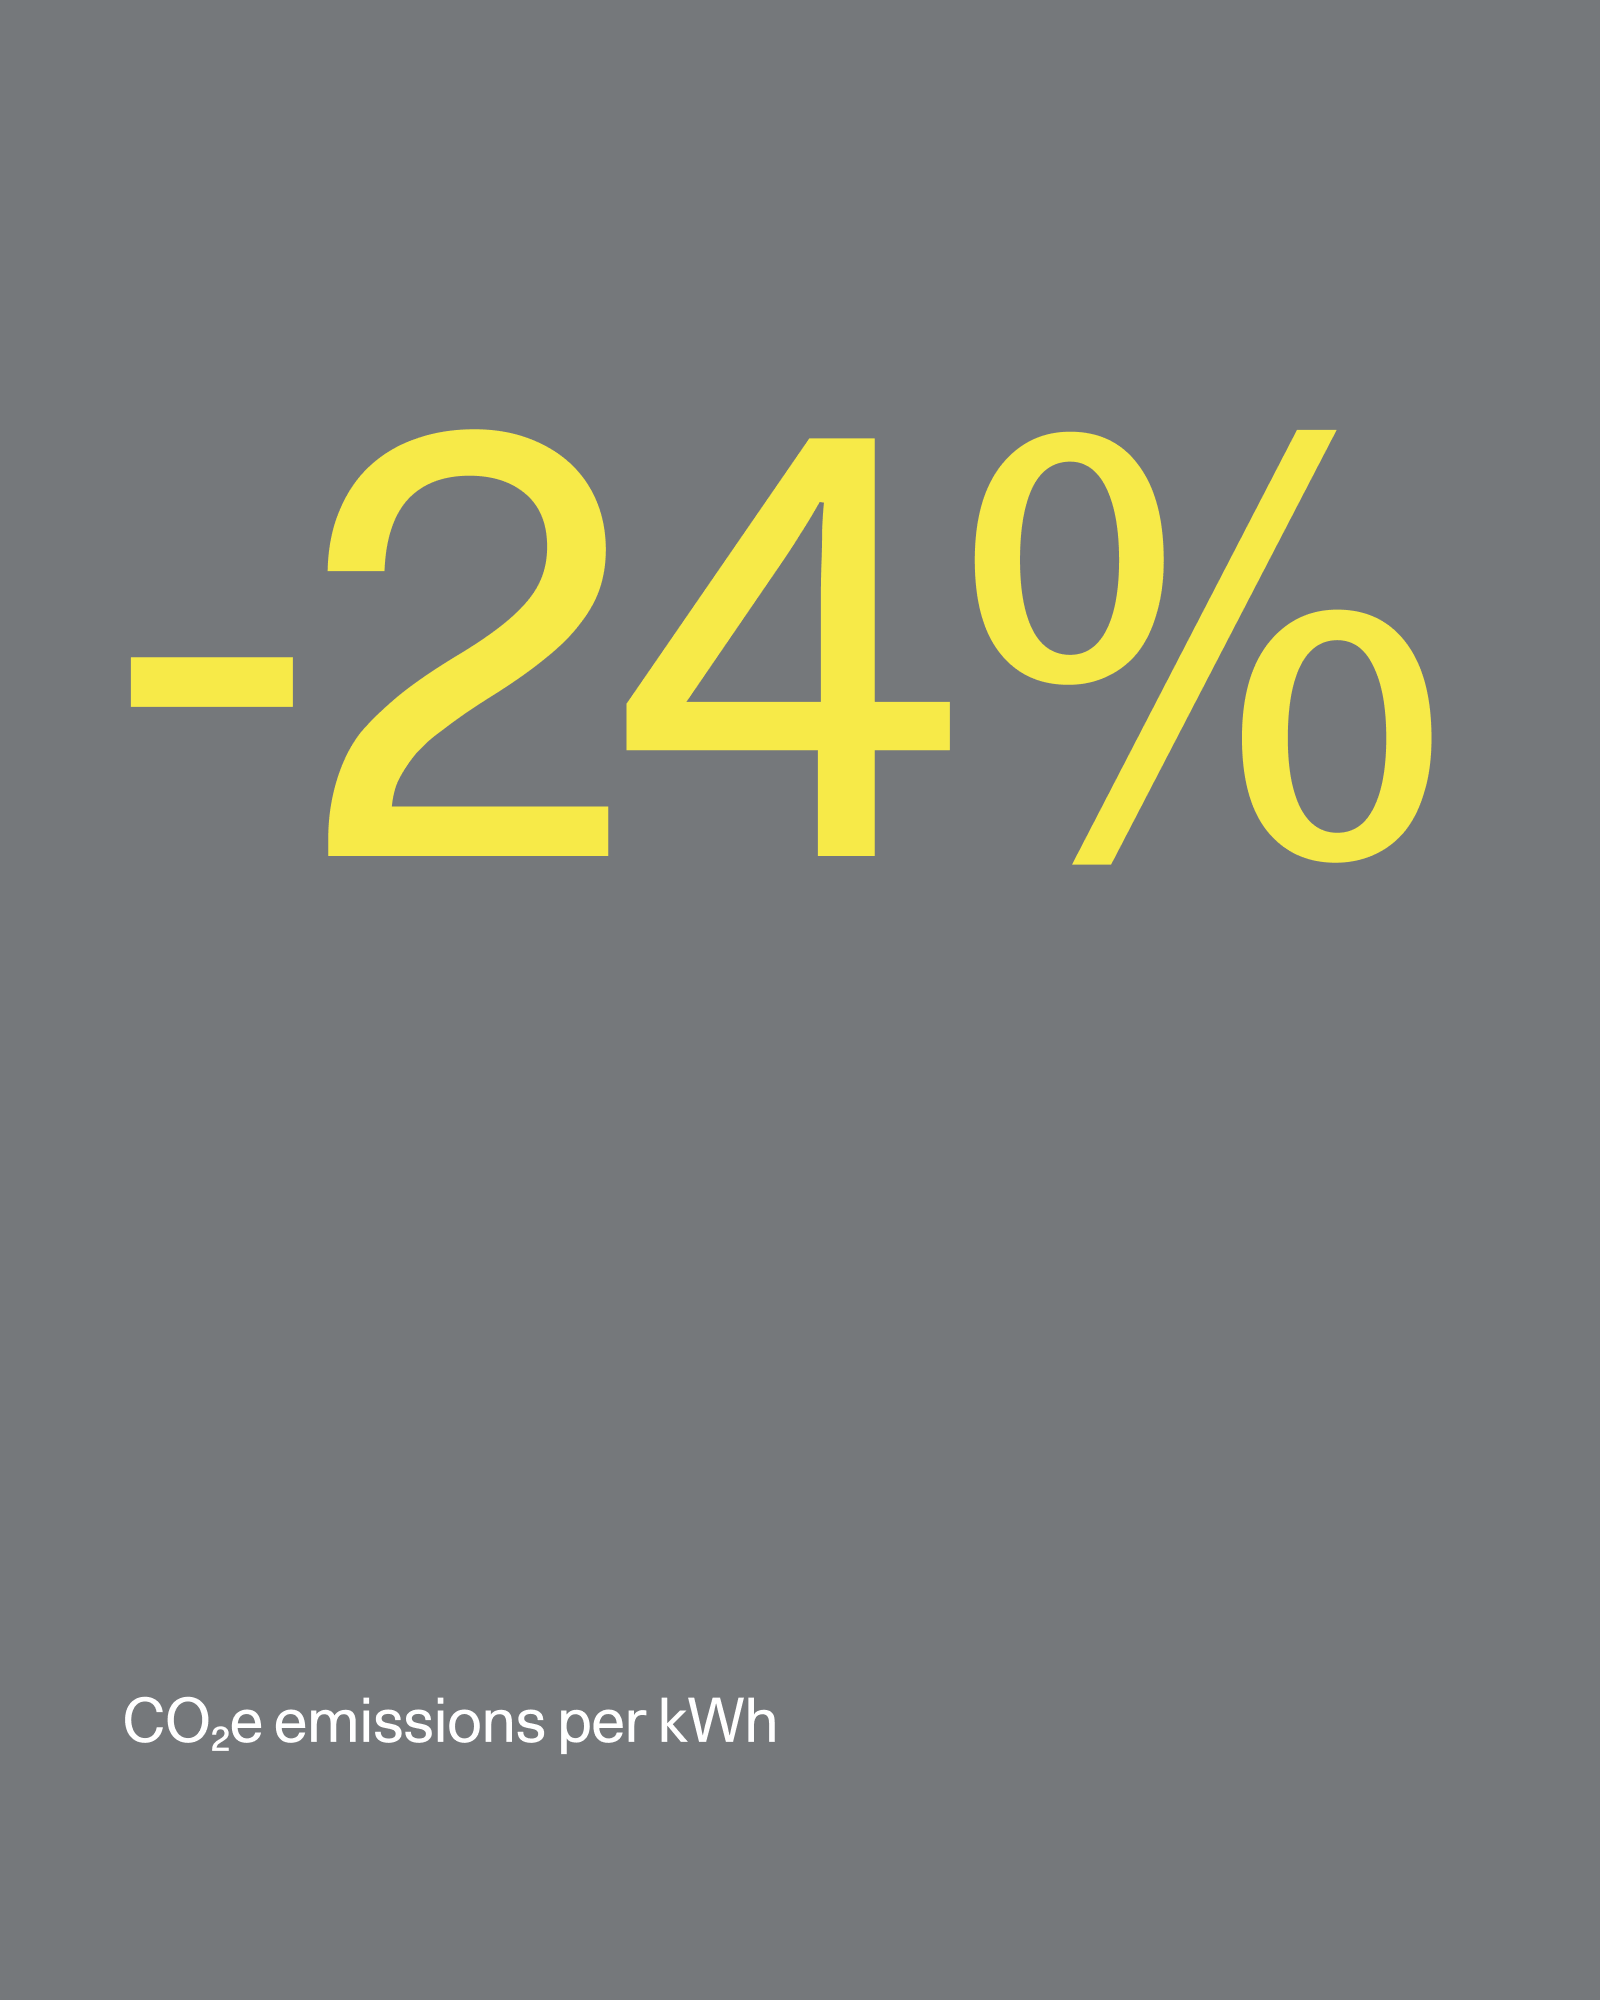 Yellow text on gray background saying - minus 24 procent CO2 emissions per kWh.